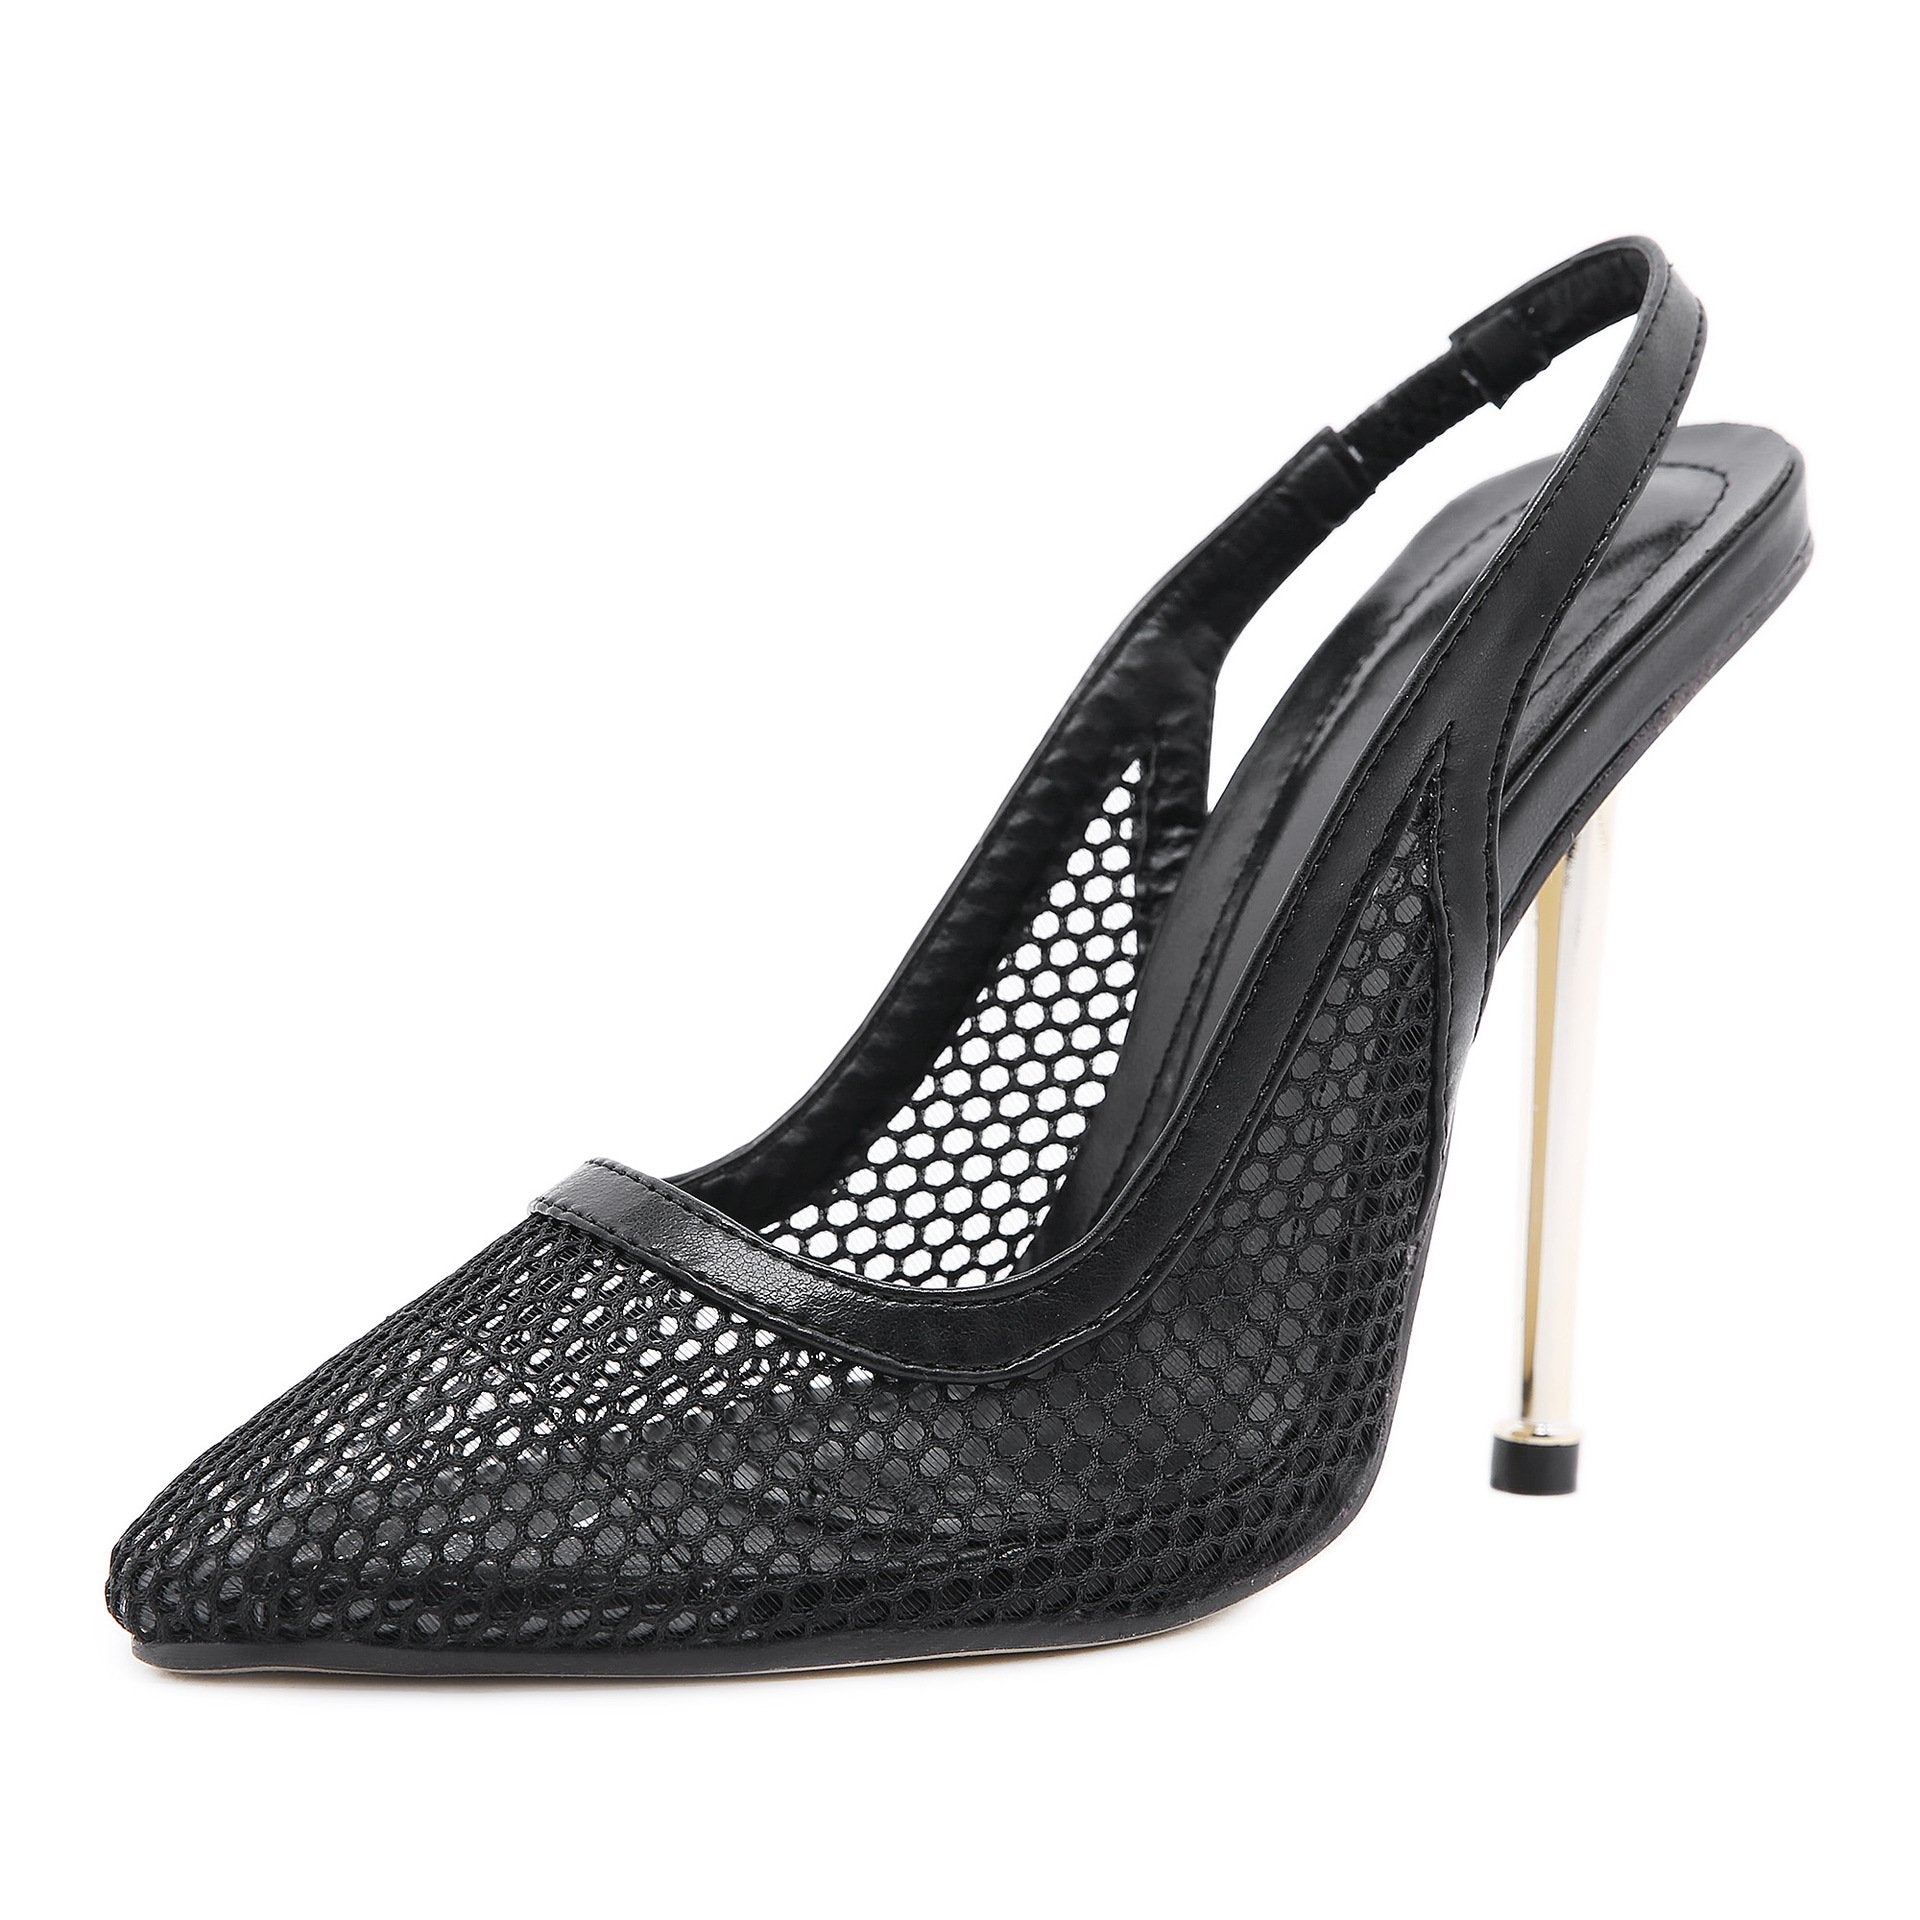 Metal High-Heeled Mesh Shoes Pointed Stiletto Sandals